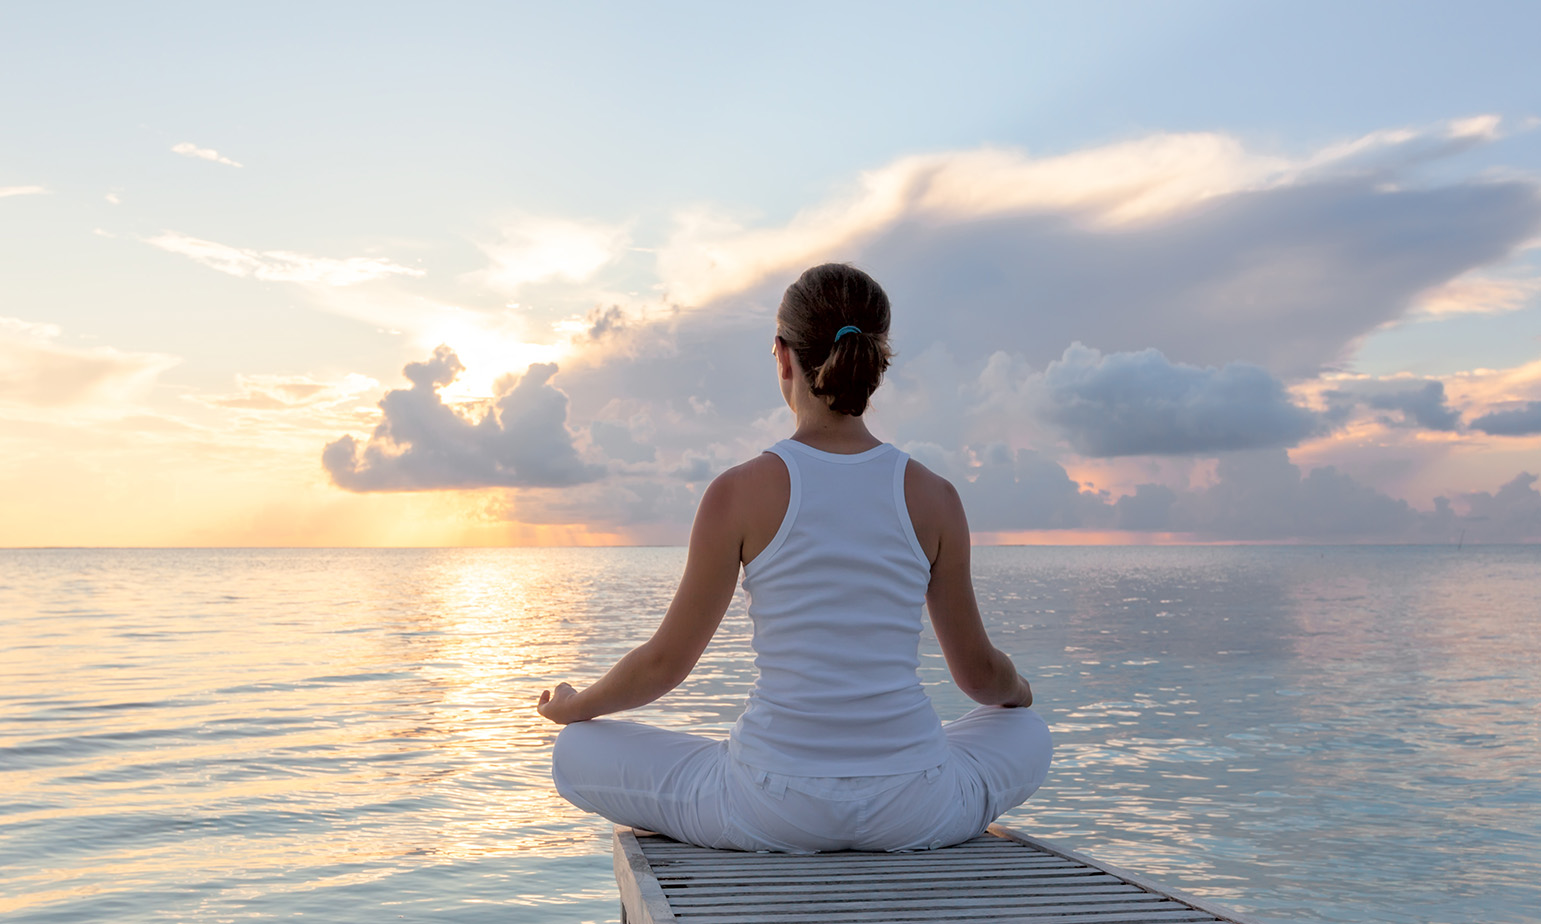 Meditation is equally effective as medication for anxiety